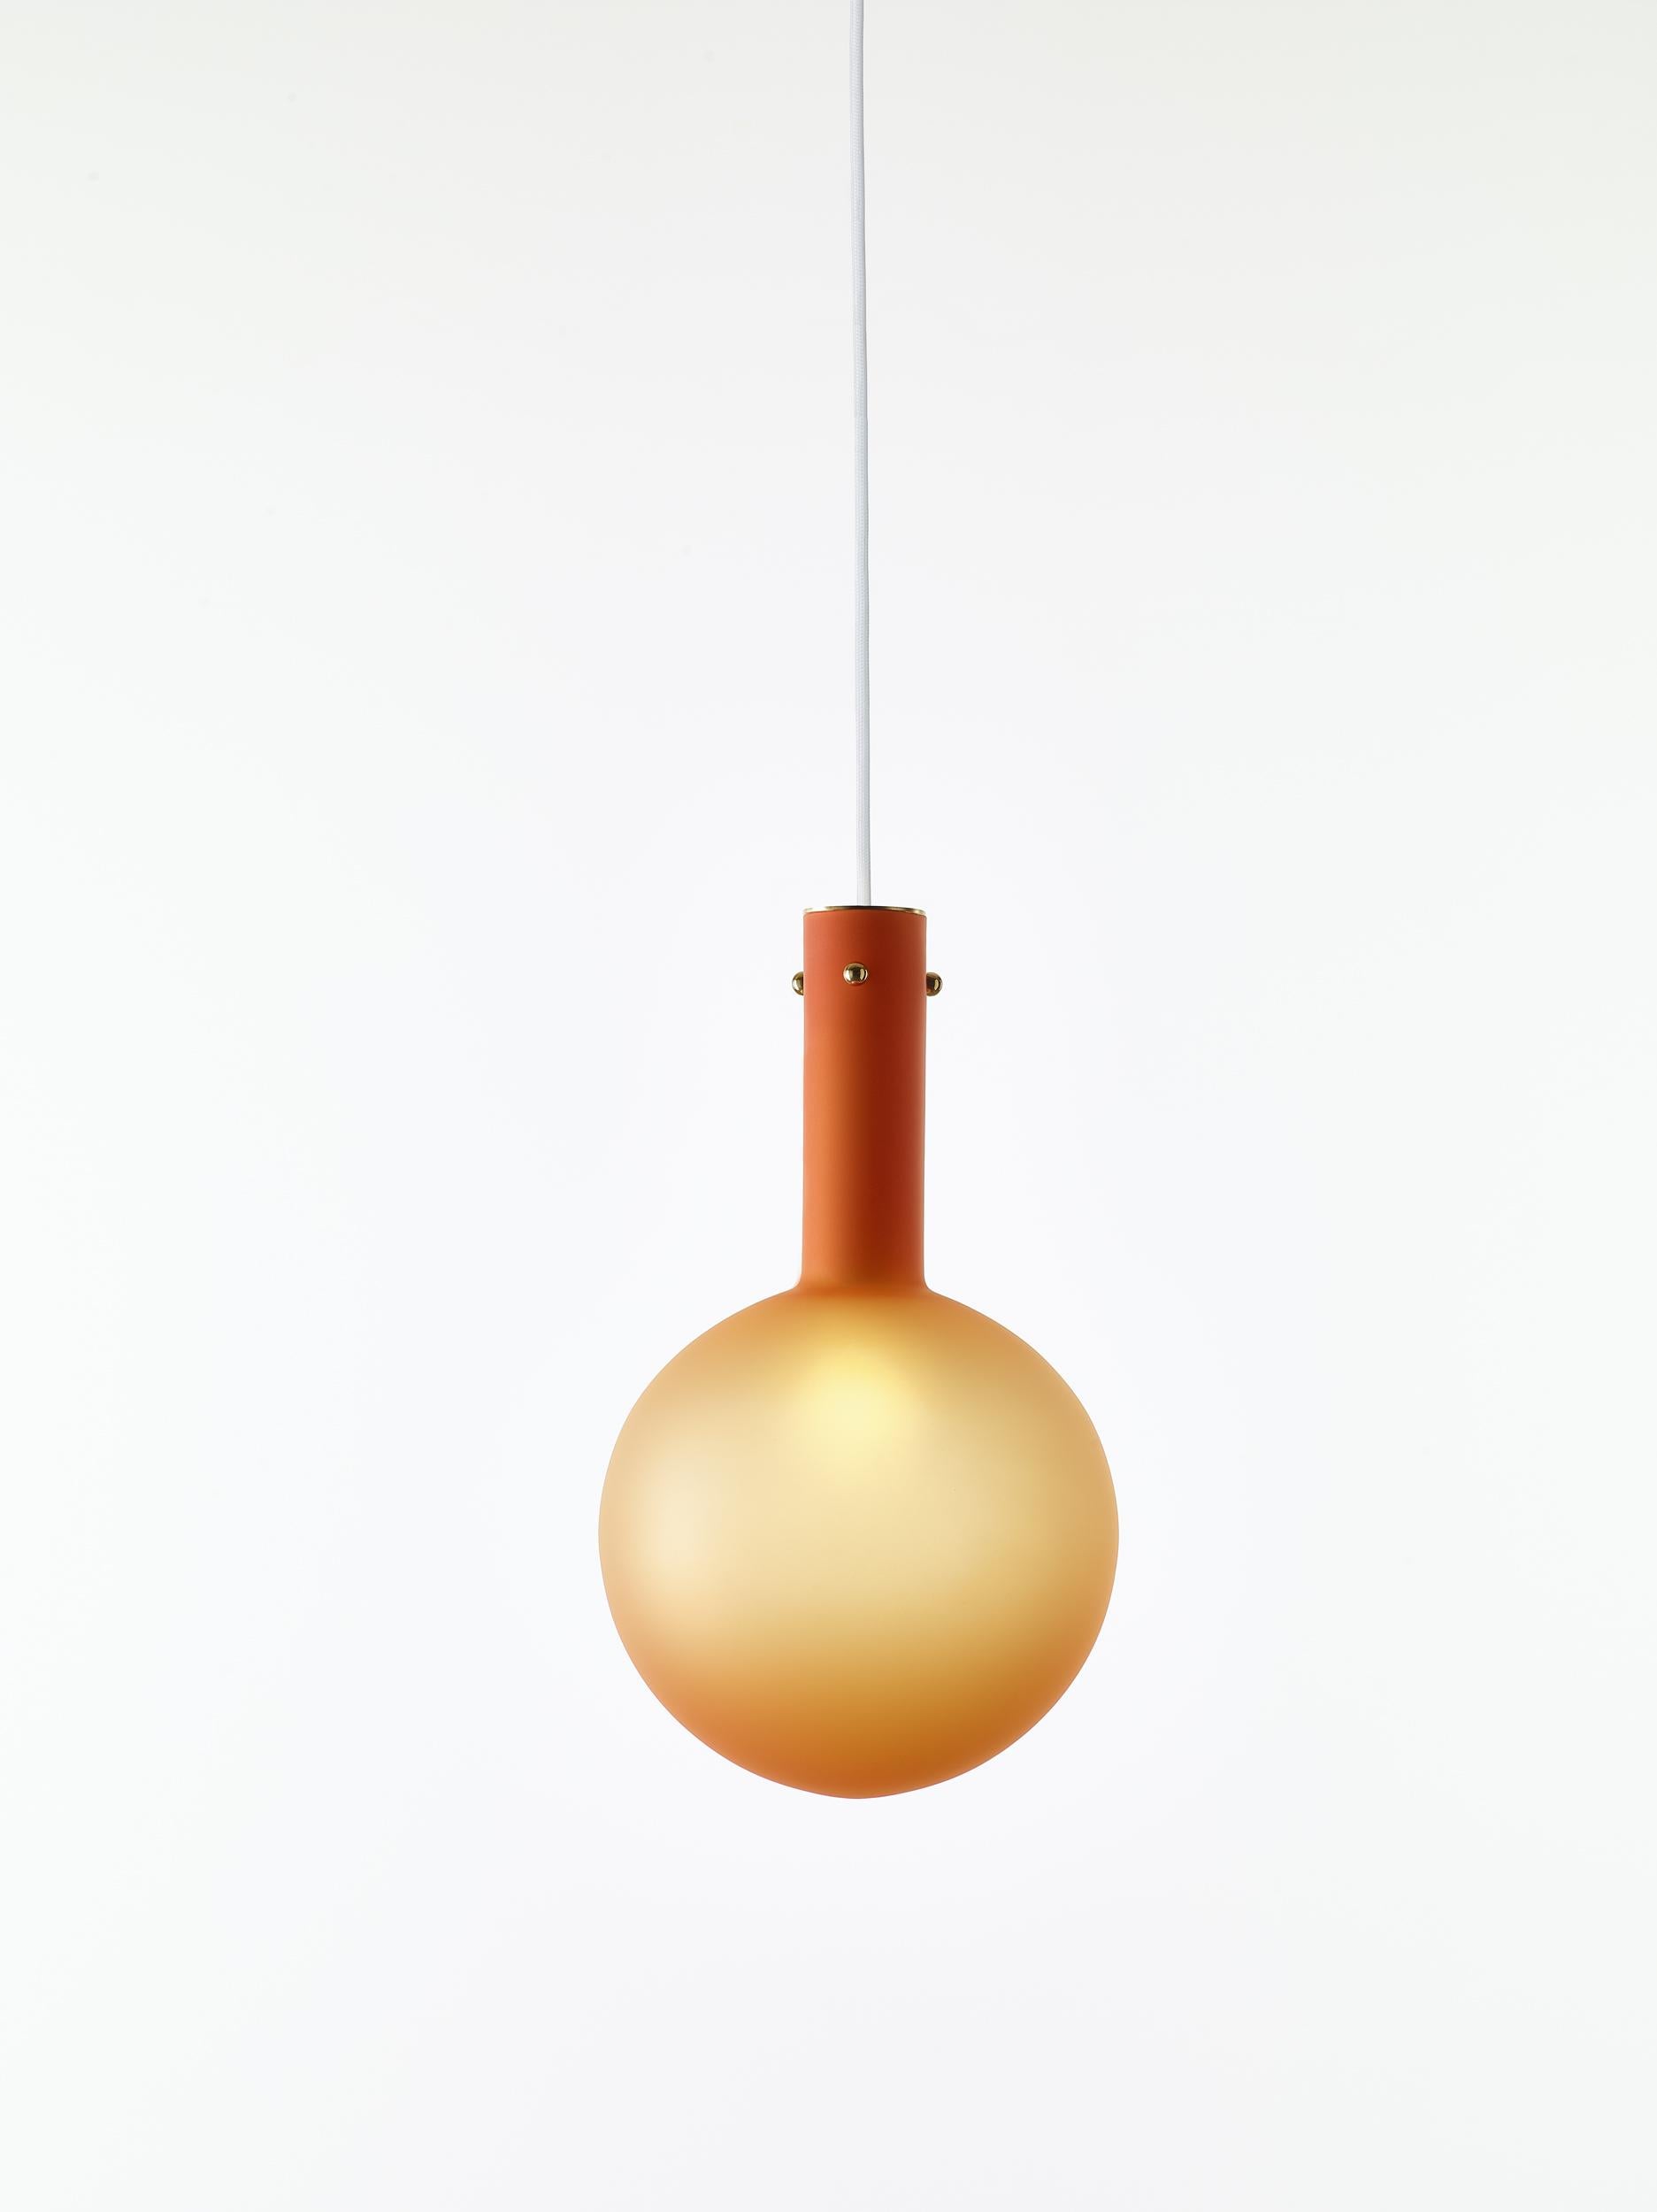 Set of 2 Matte Orange Sphaerae pendant lights by Dechem Studio
Dimensions: D 20 x H 180 cm
Materials: brass, metal, glass.
Also available: different finishes and colours available.

Only one homogenous piece of hand-blown glass creates the main